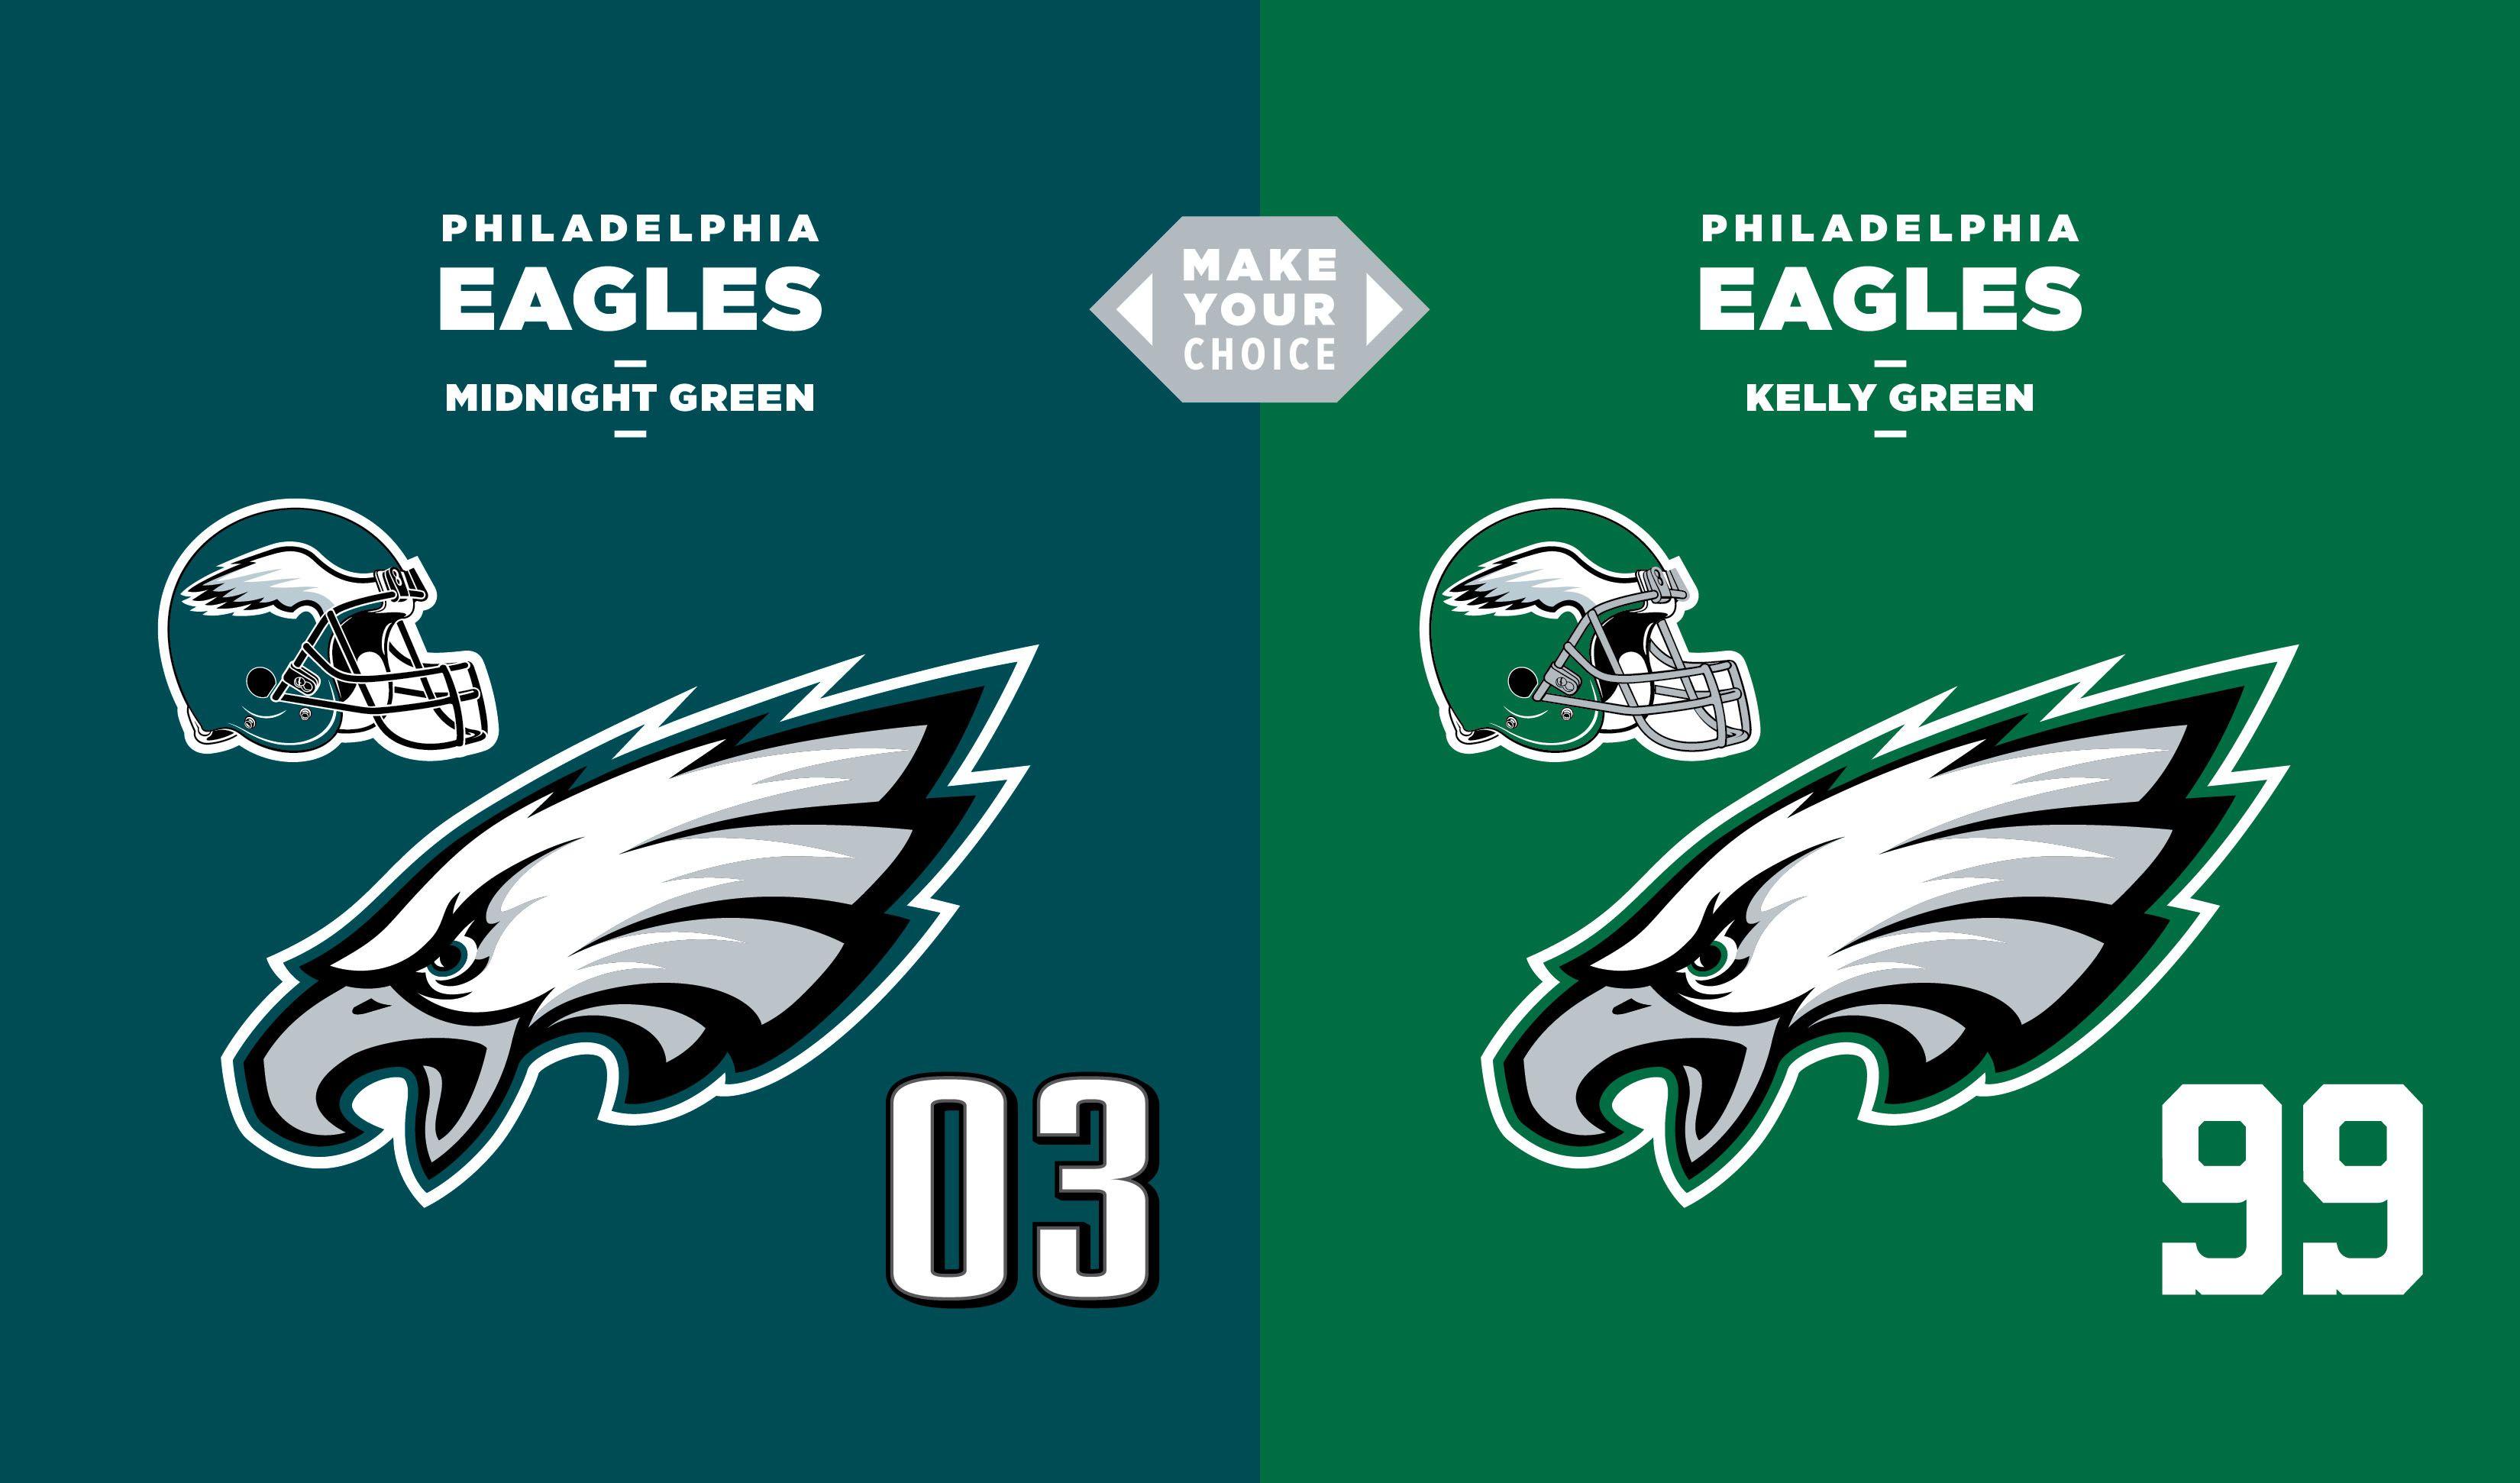 Kelly Green Eagles Logo - The Eagles might go back to Kelly Green | Sports Graphics | Sports ...